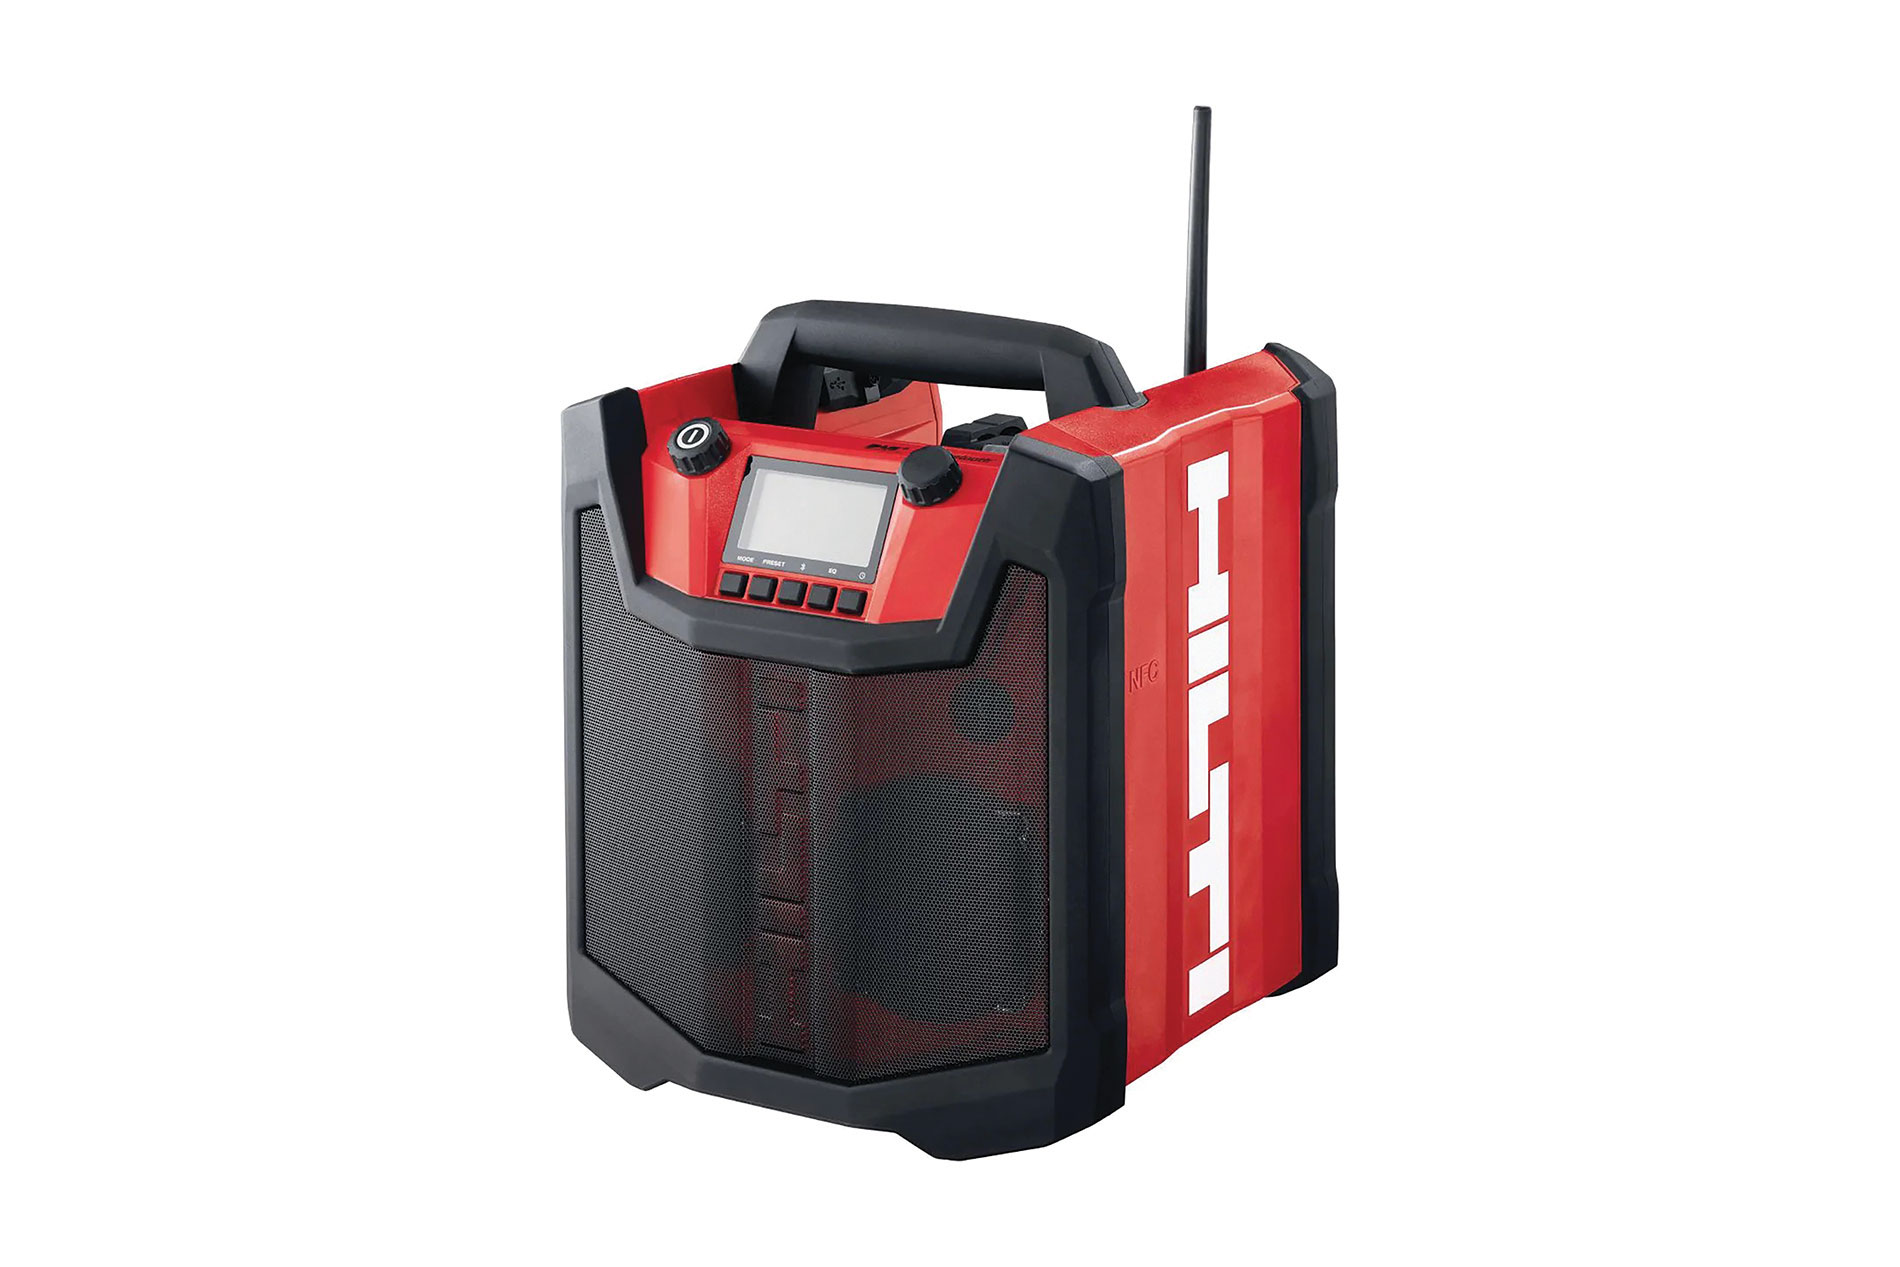 Black and red radio. Image by Hilti.